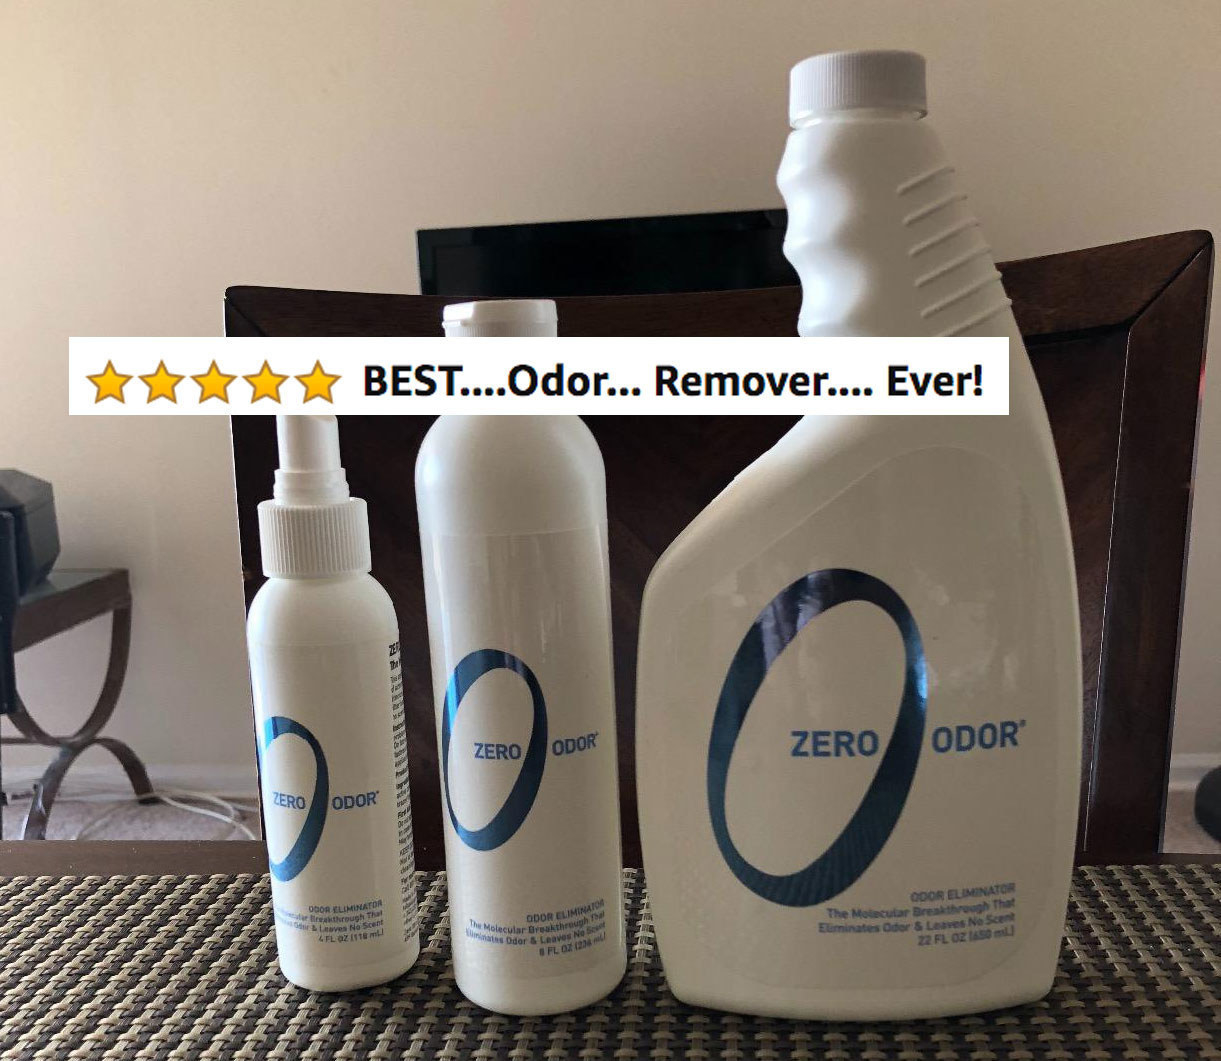 A reviewer showing the product in three differently sized bottles